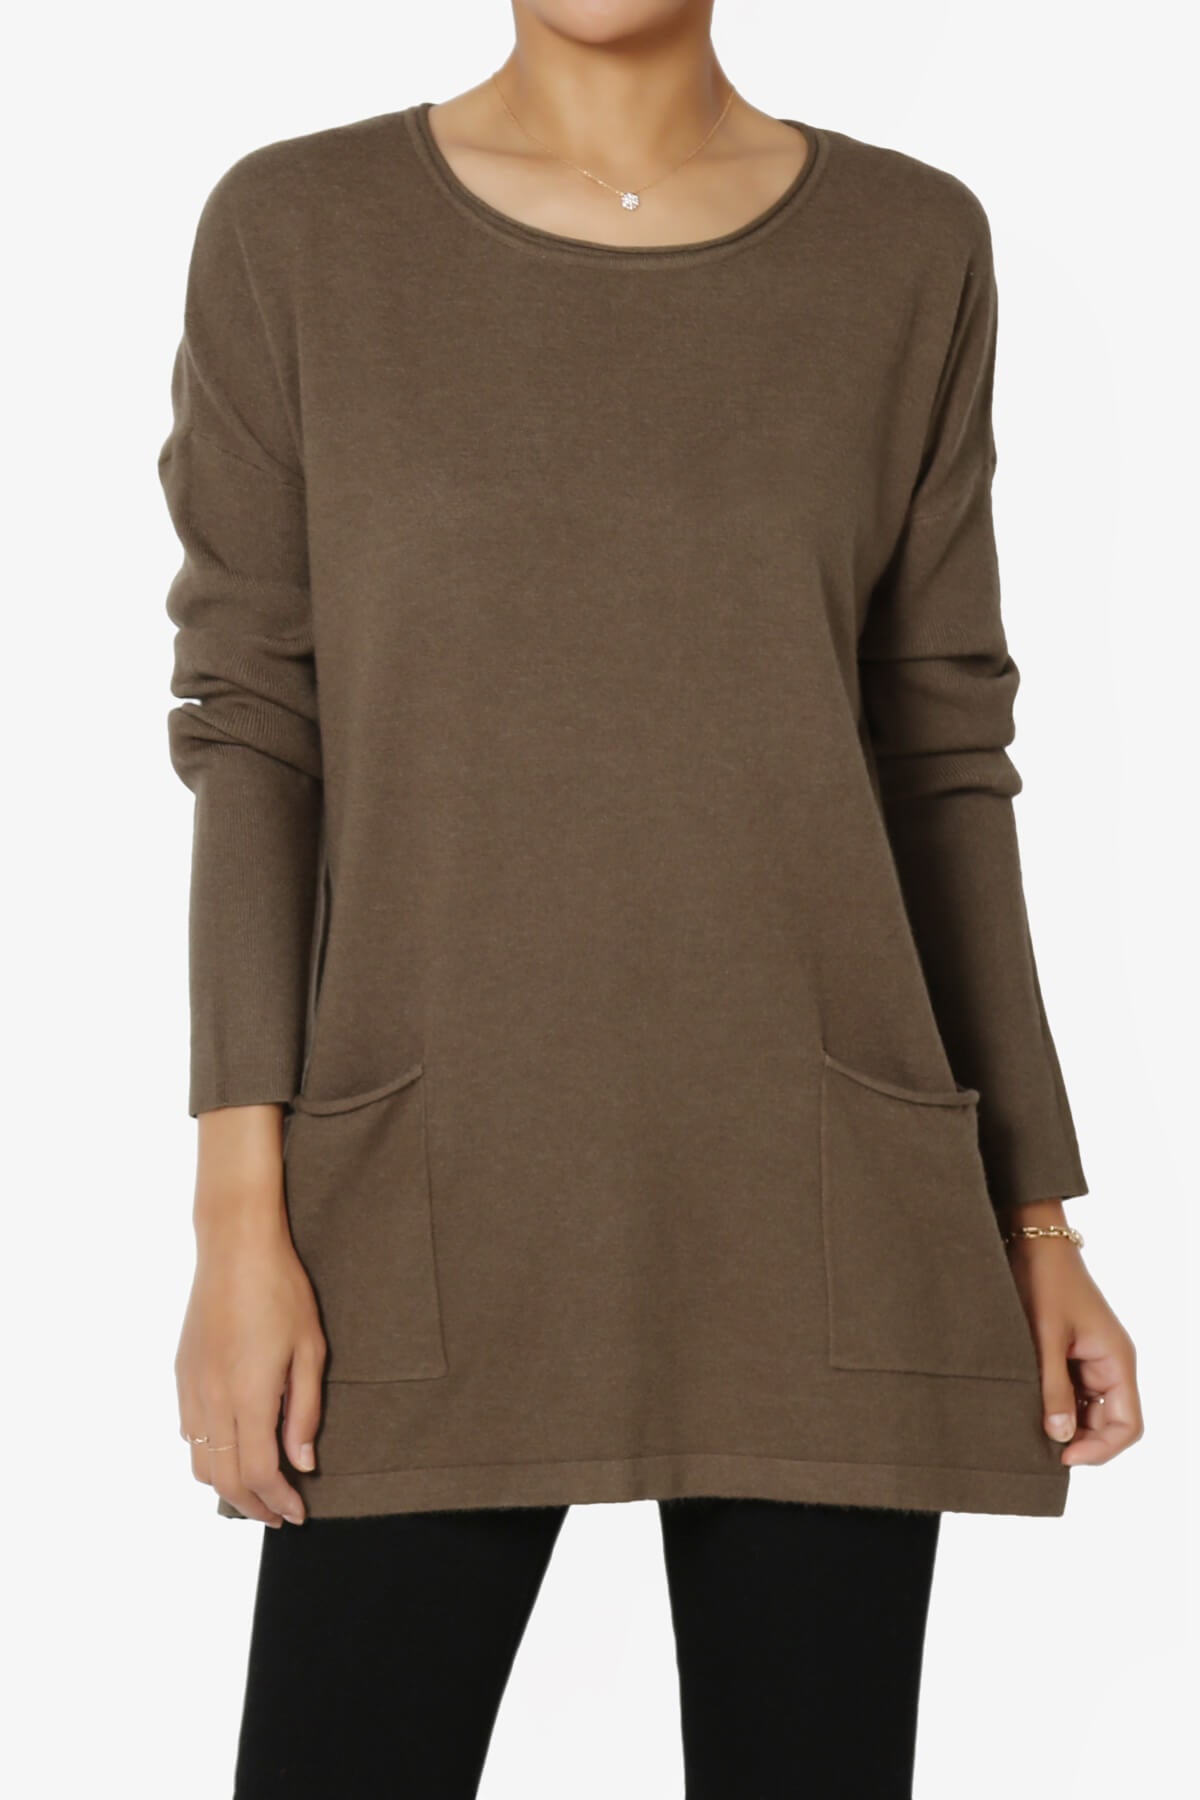 Load image into Gallery viewer, Brecken Pocket Long Sleeve Soft Knit Sweater Tunic MOCHA_1
